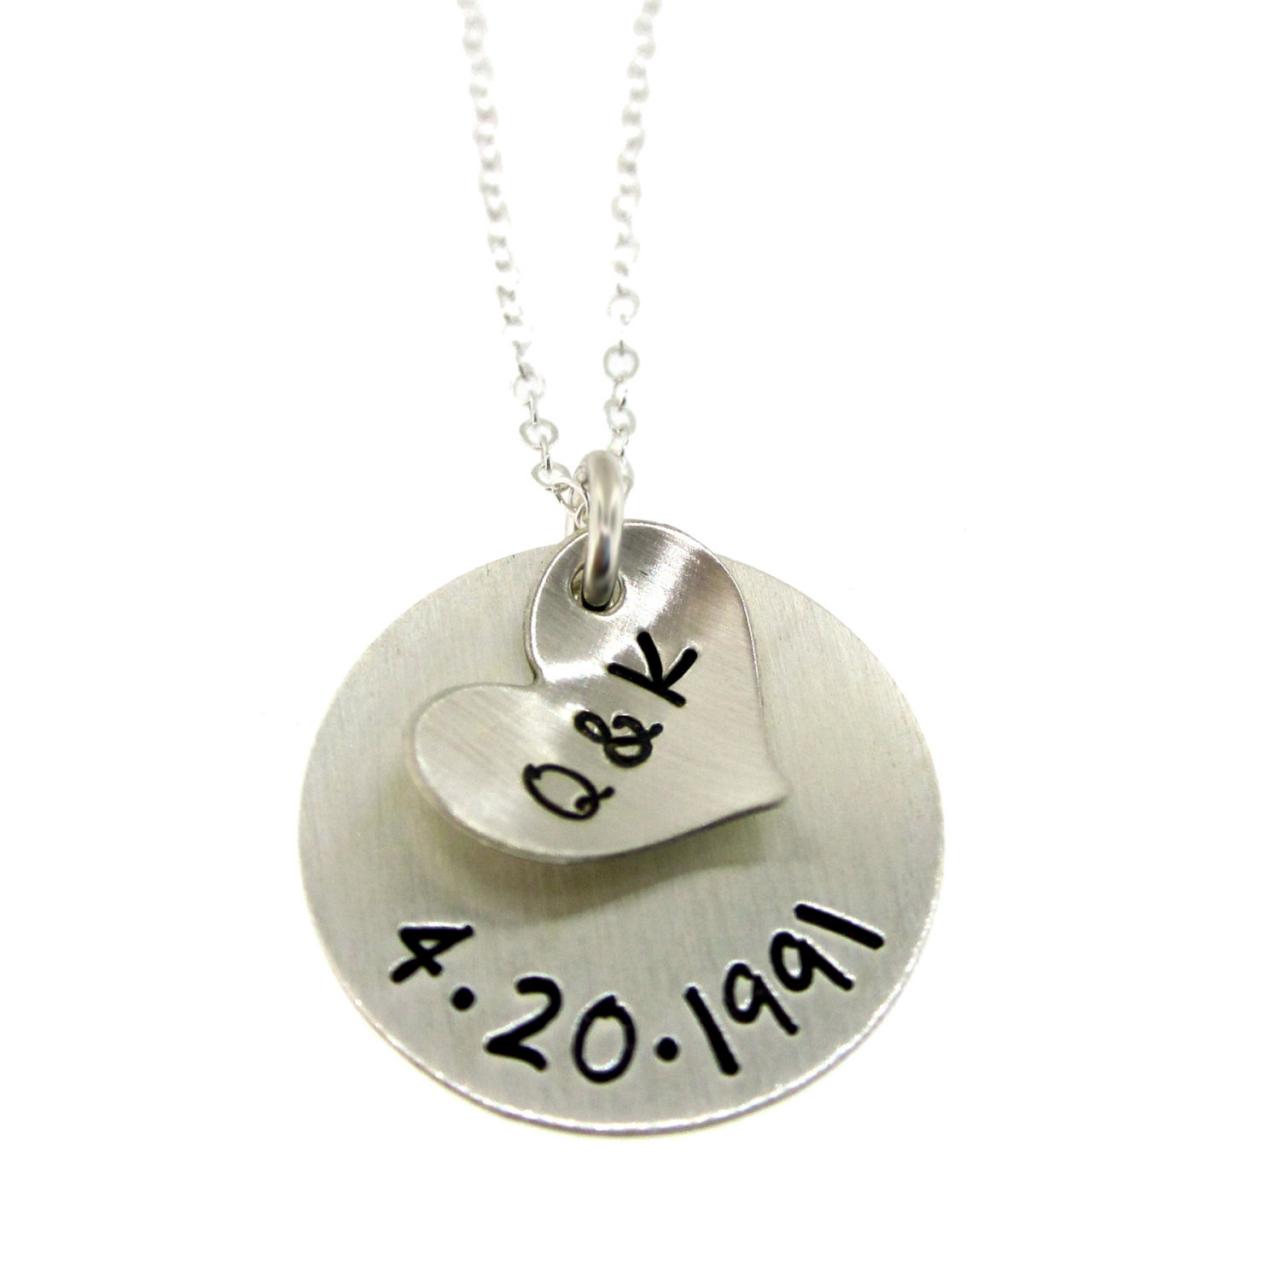 Personalized / Customized Sterling Silver Necklace - Our Initials And Anniversary Date Hand Stamped Jewelry